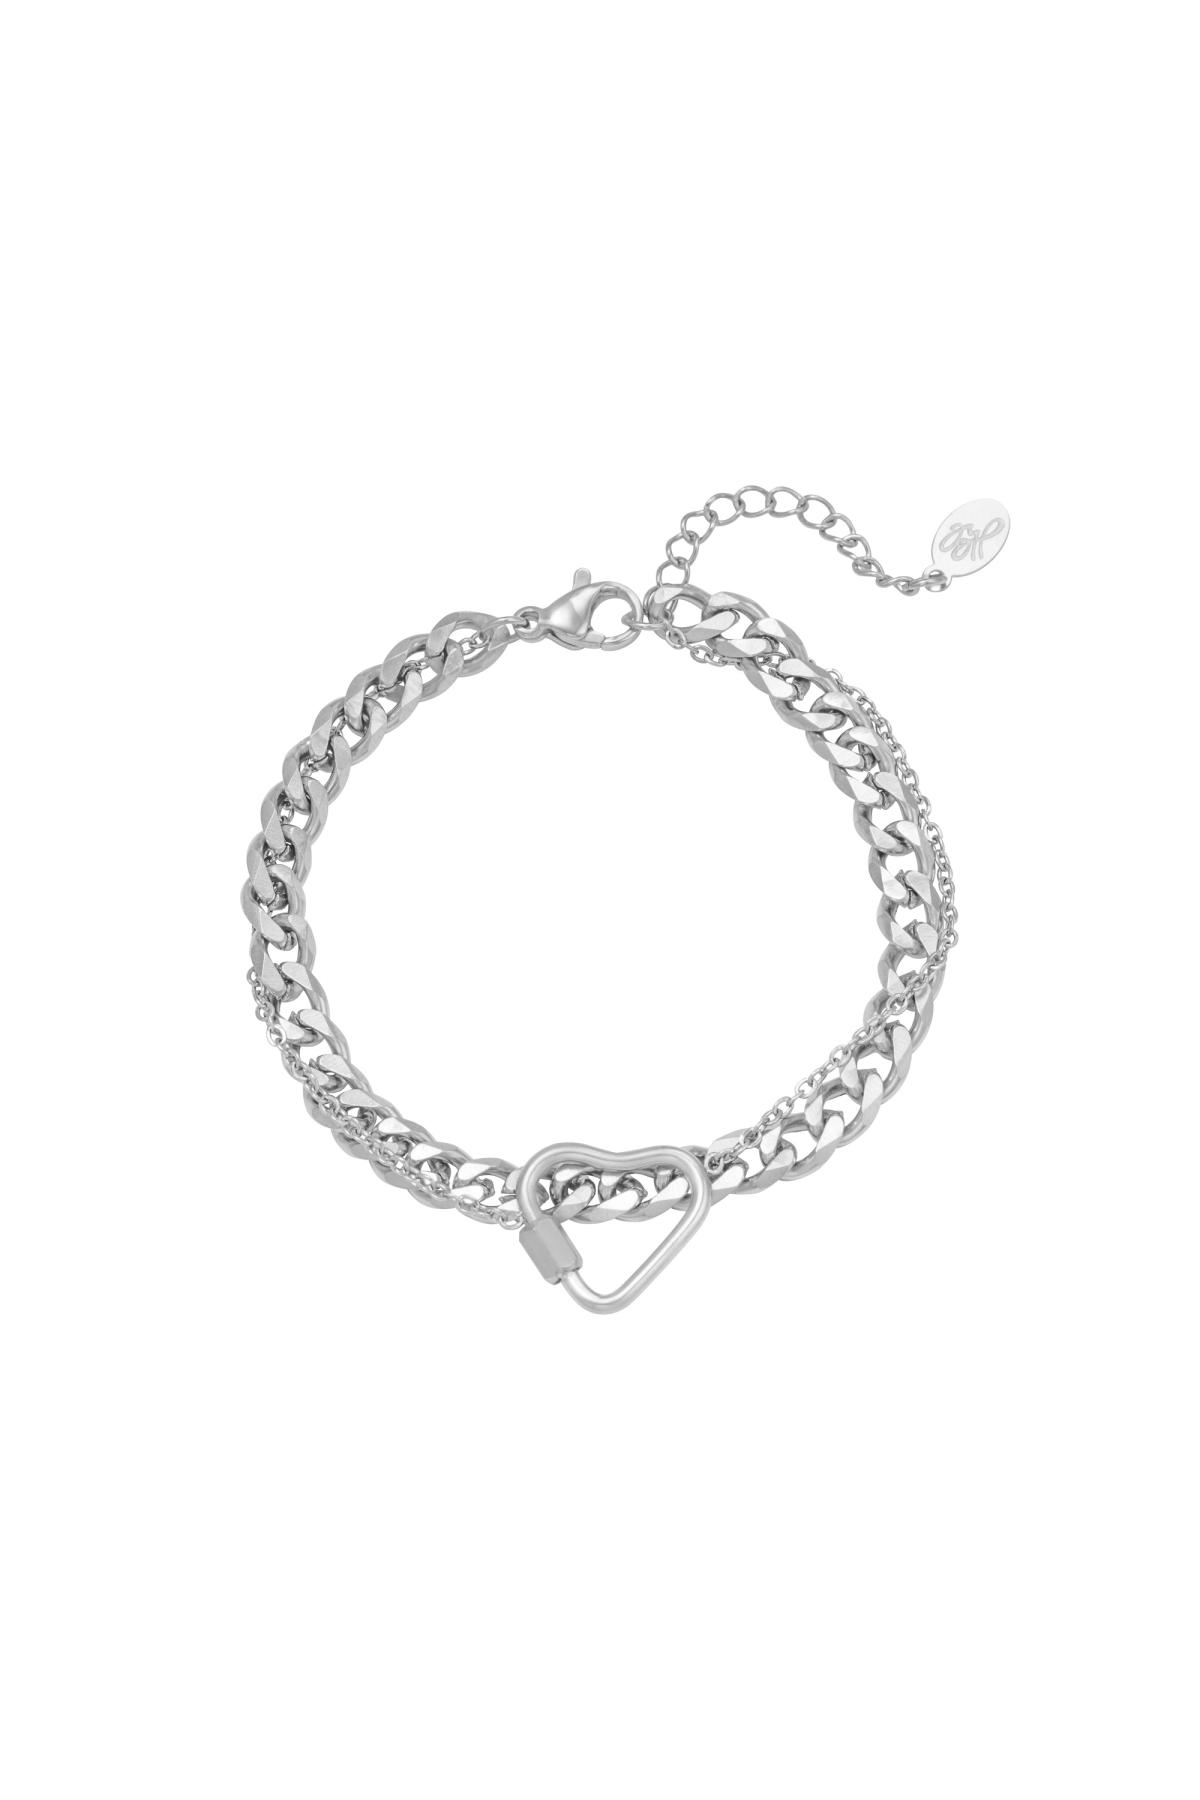 Bracelet Chained Heart Silver Stainless Steel